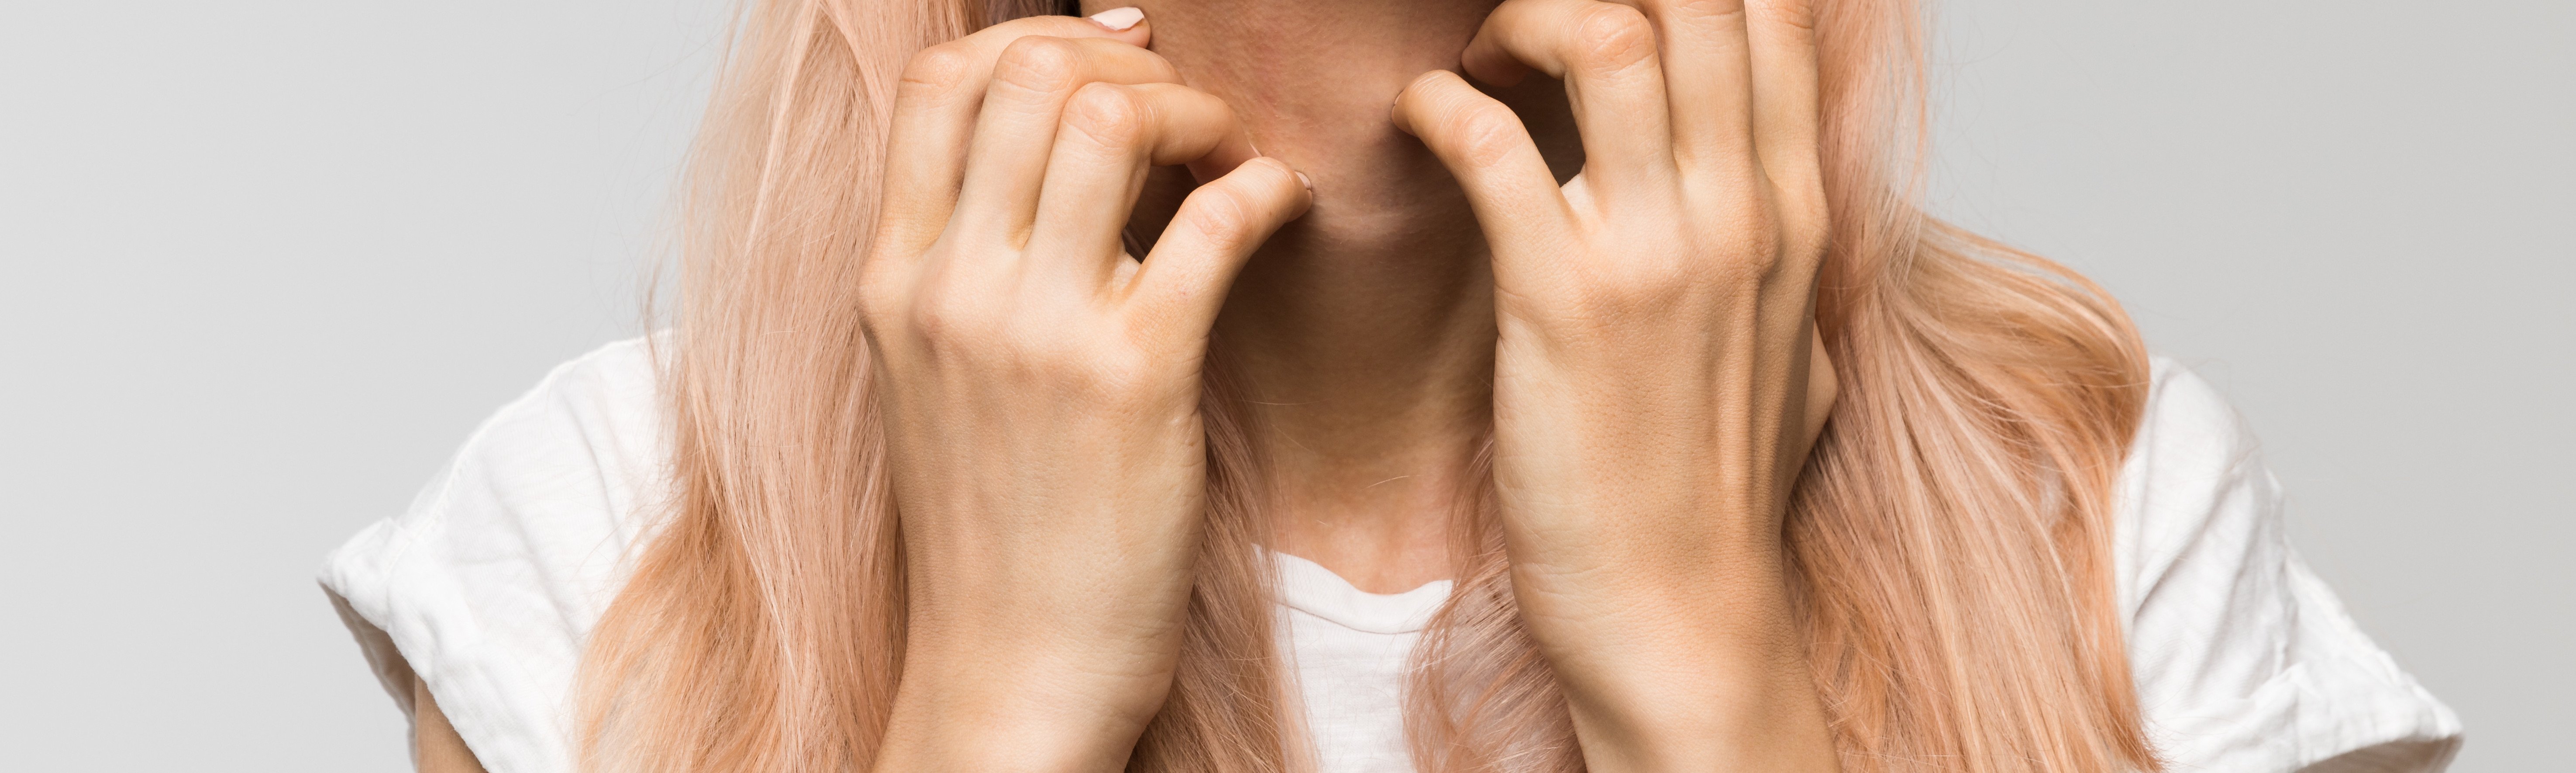 woman with light pink hair scratching with both hands at the skin on her neck wearing a white tee shirt on a gray background